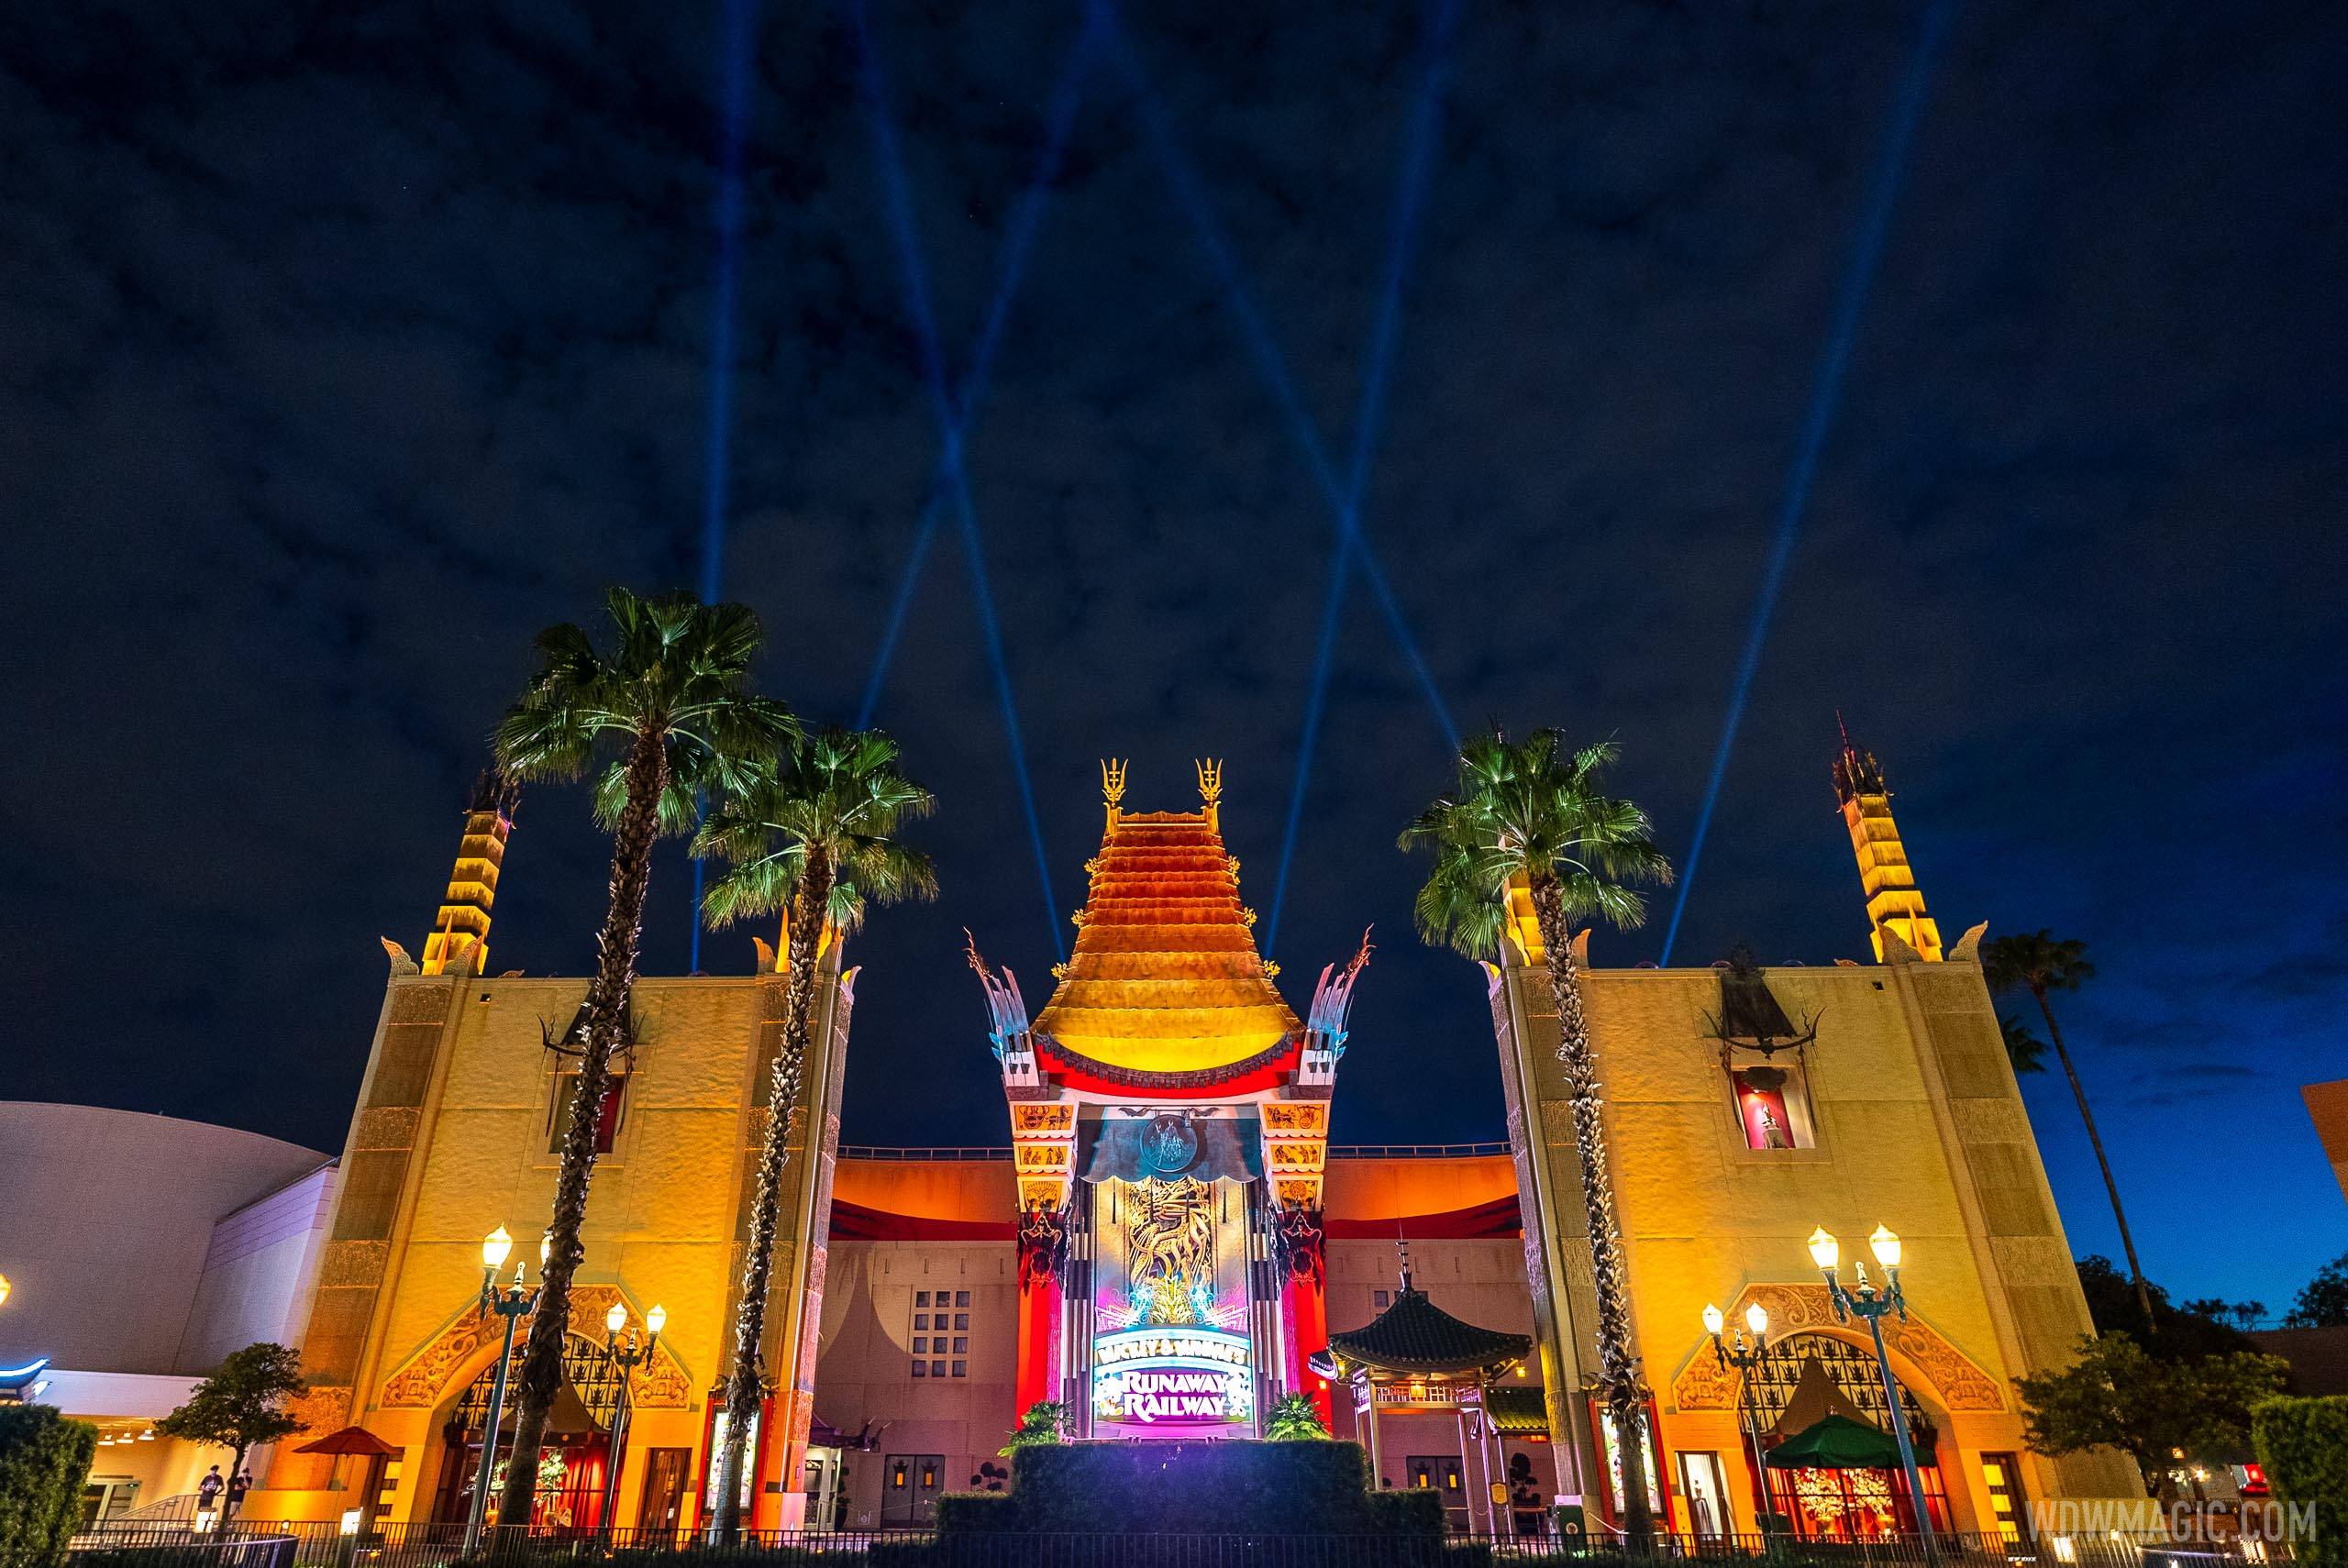 New lighting design and searchlights at Disney's Hollywood Studios Chinese Theater